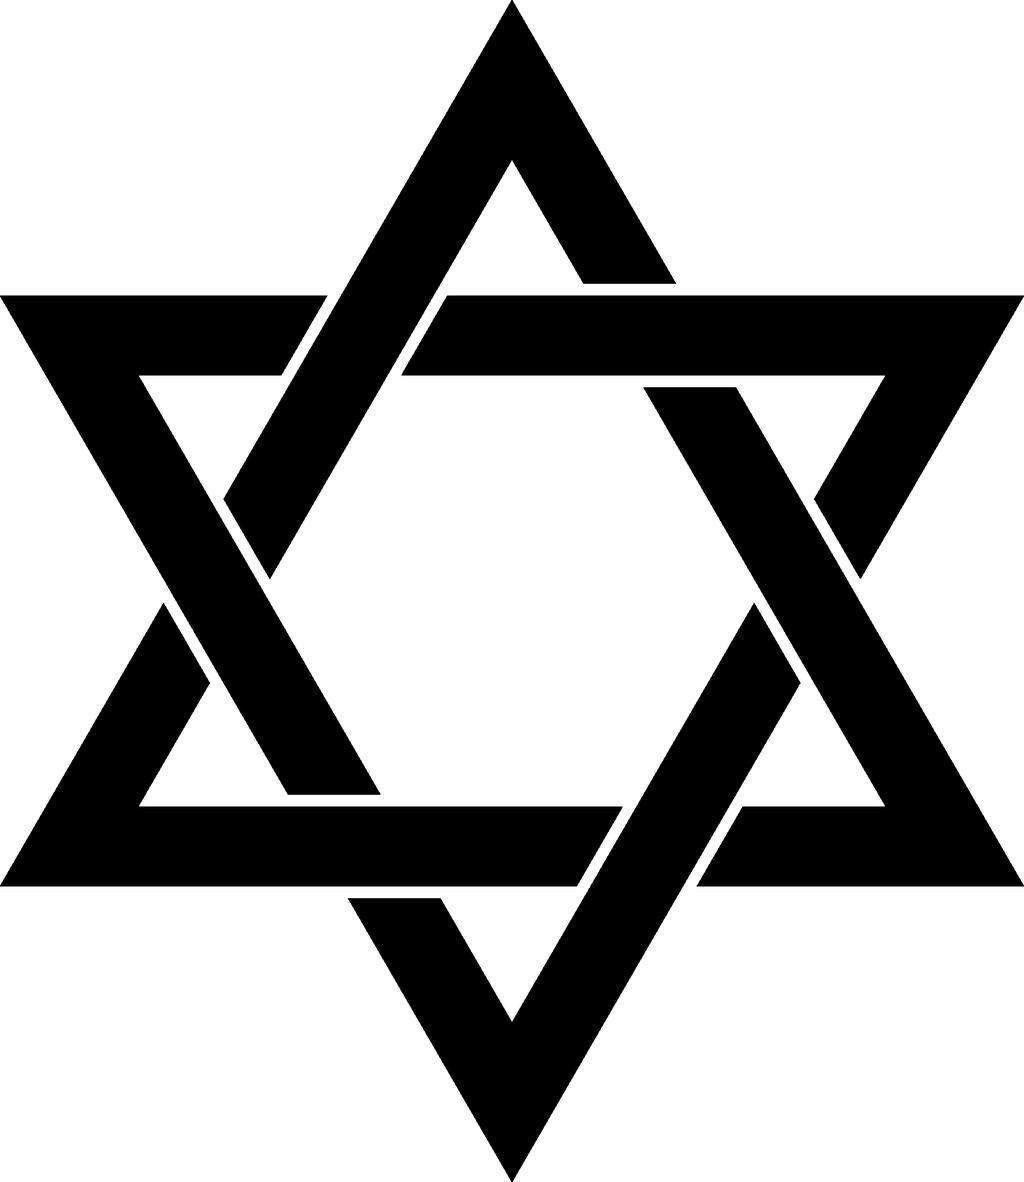 Star of David Containing two overlapping triangles, the Star of David is